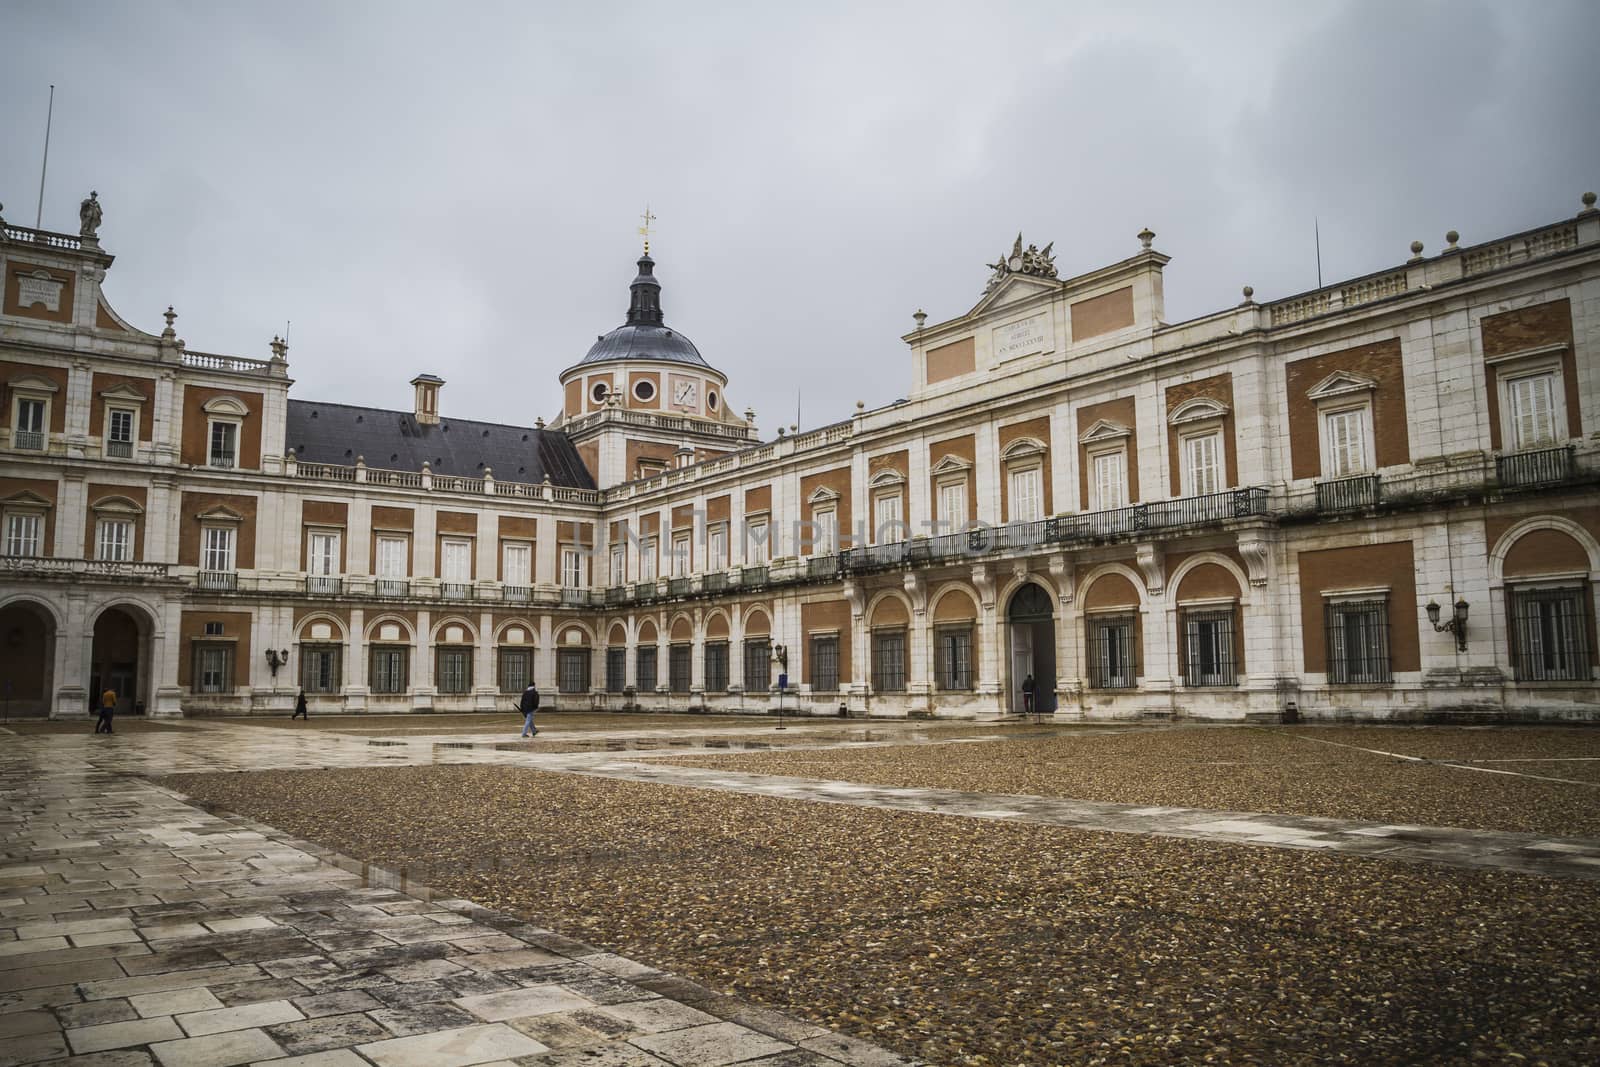 majestic palace of Aranjuez in Madrid, Spain by FernandoCortes